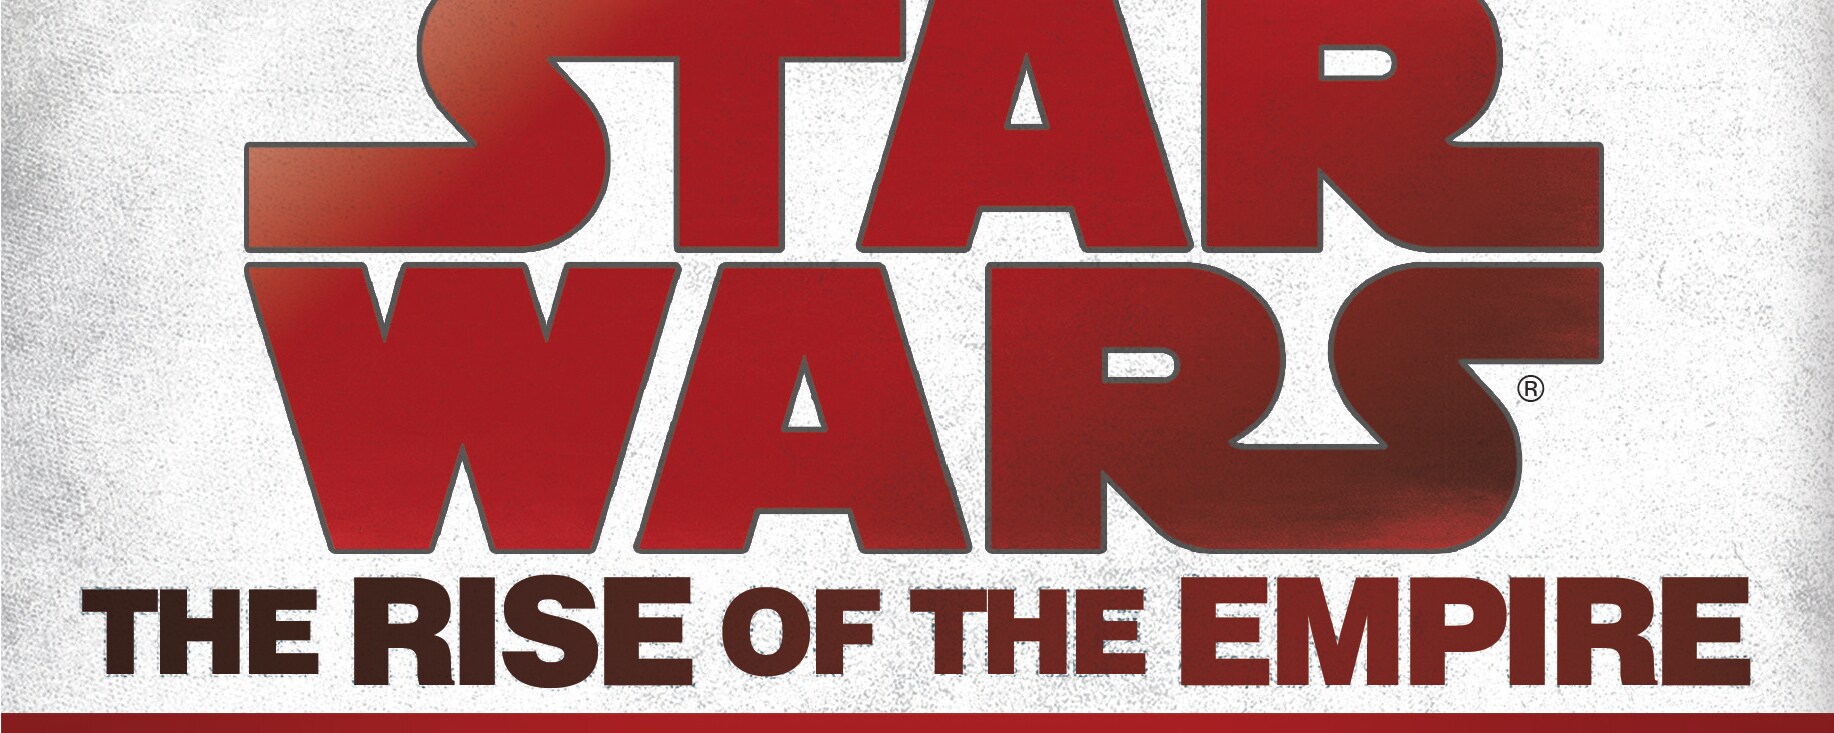 Star Wars: Rise of the Empire Bind-Up Coming Soon from Del Rey